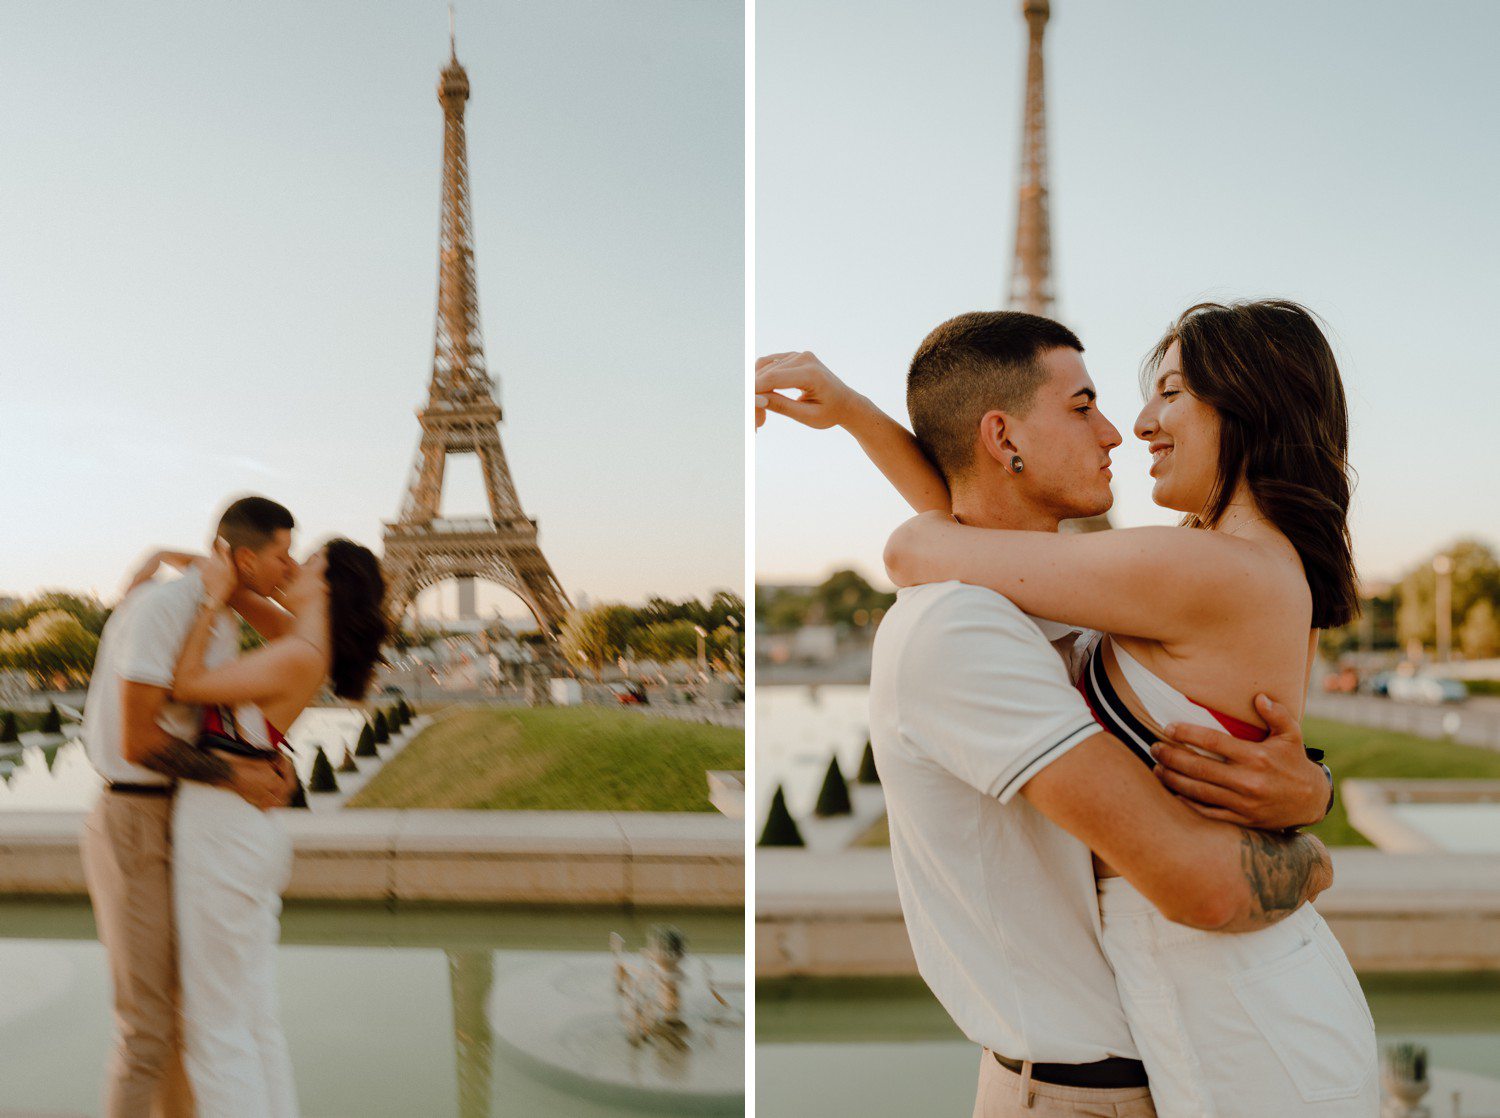 Couples Photos at the Eiffel Tower in Paris